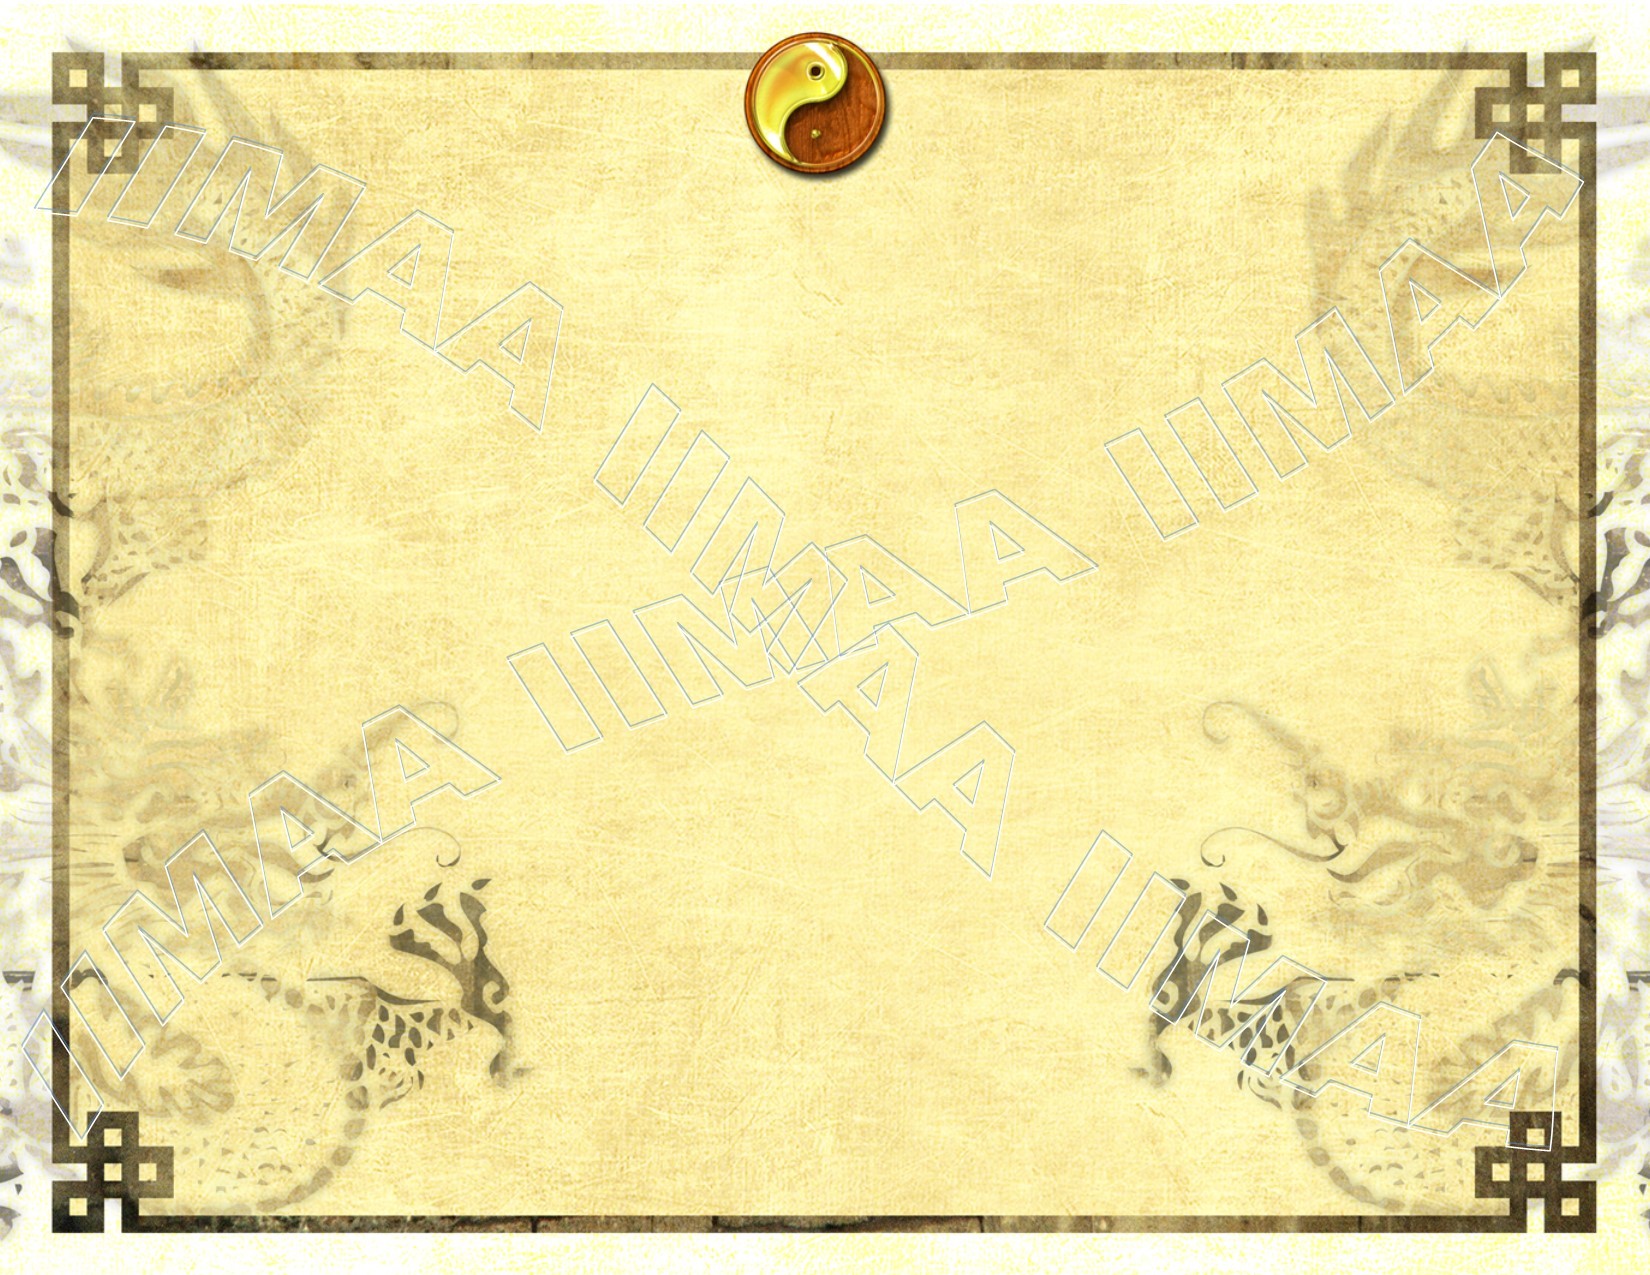 Student YIN YANG Dragon Certificate International Independent Martial Arts Template